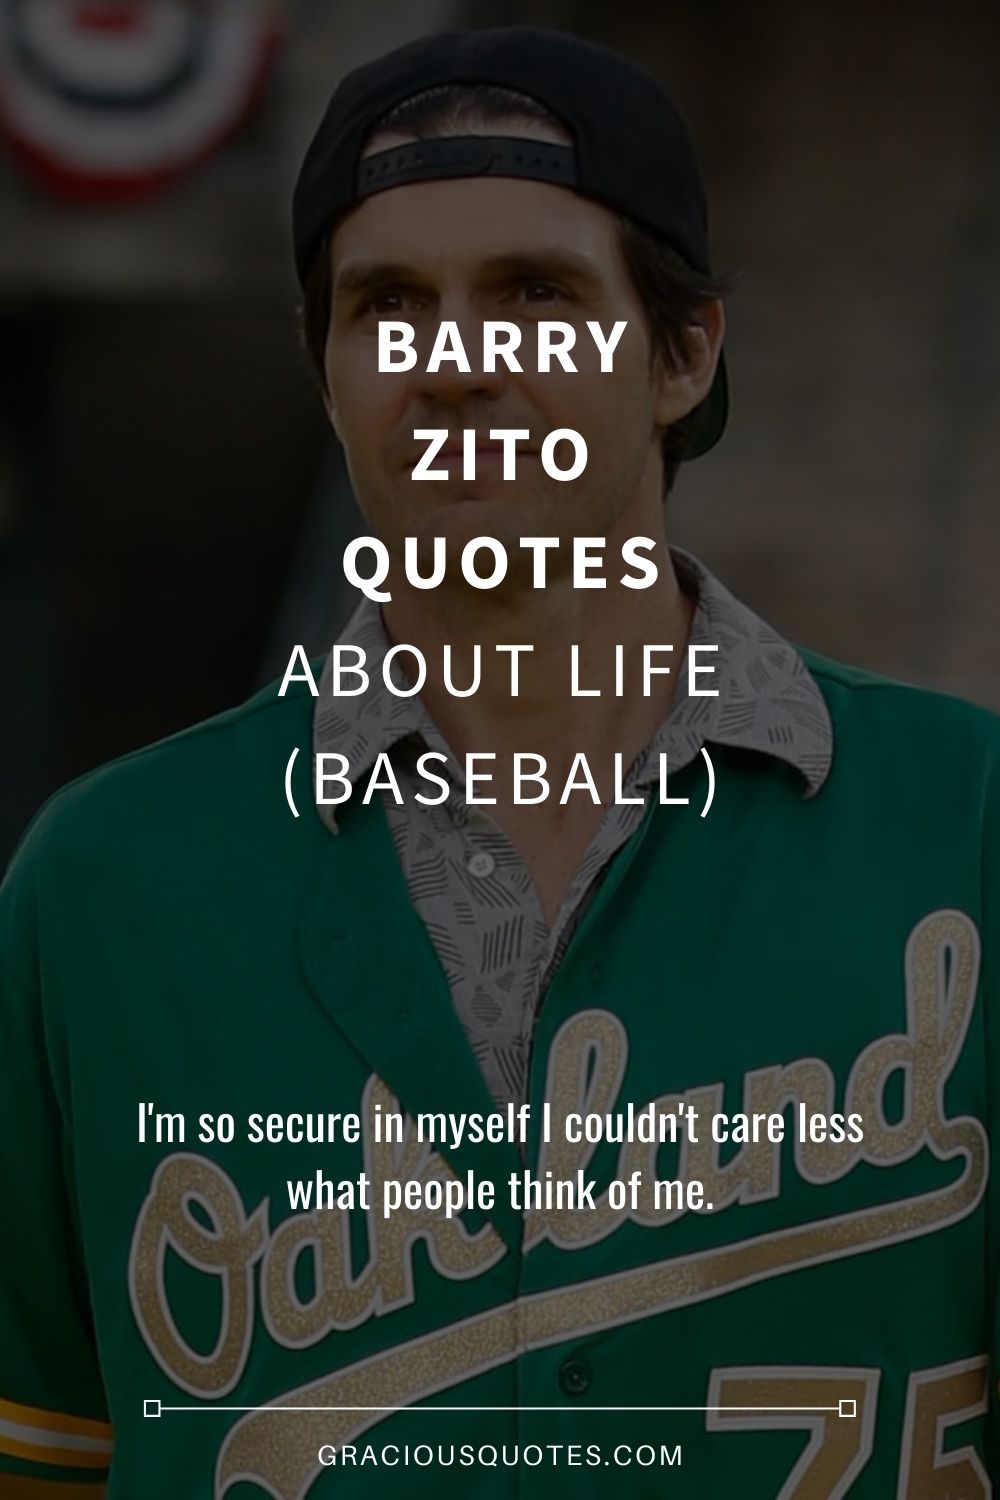 Top 29 Barry Zito Quotes About Life (BASEBALL)